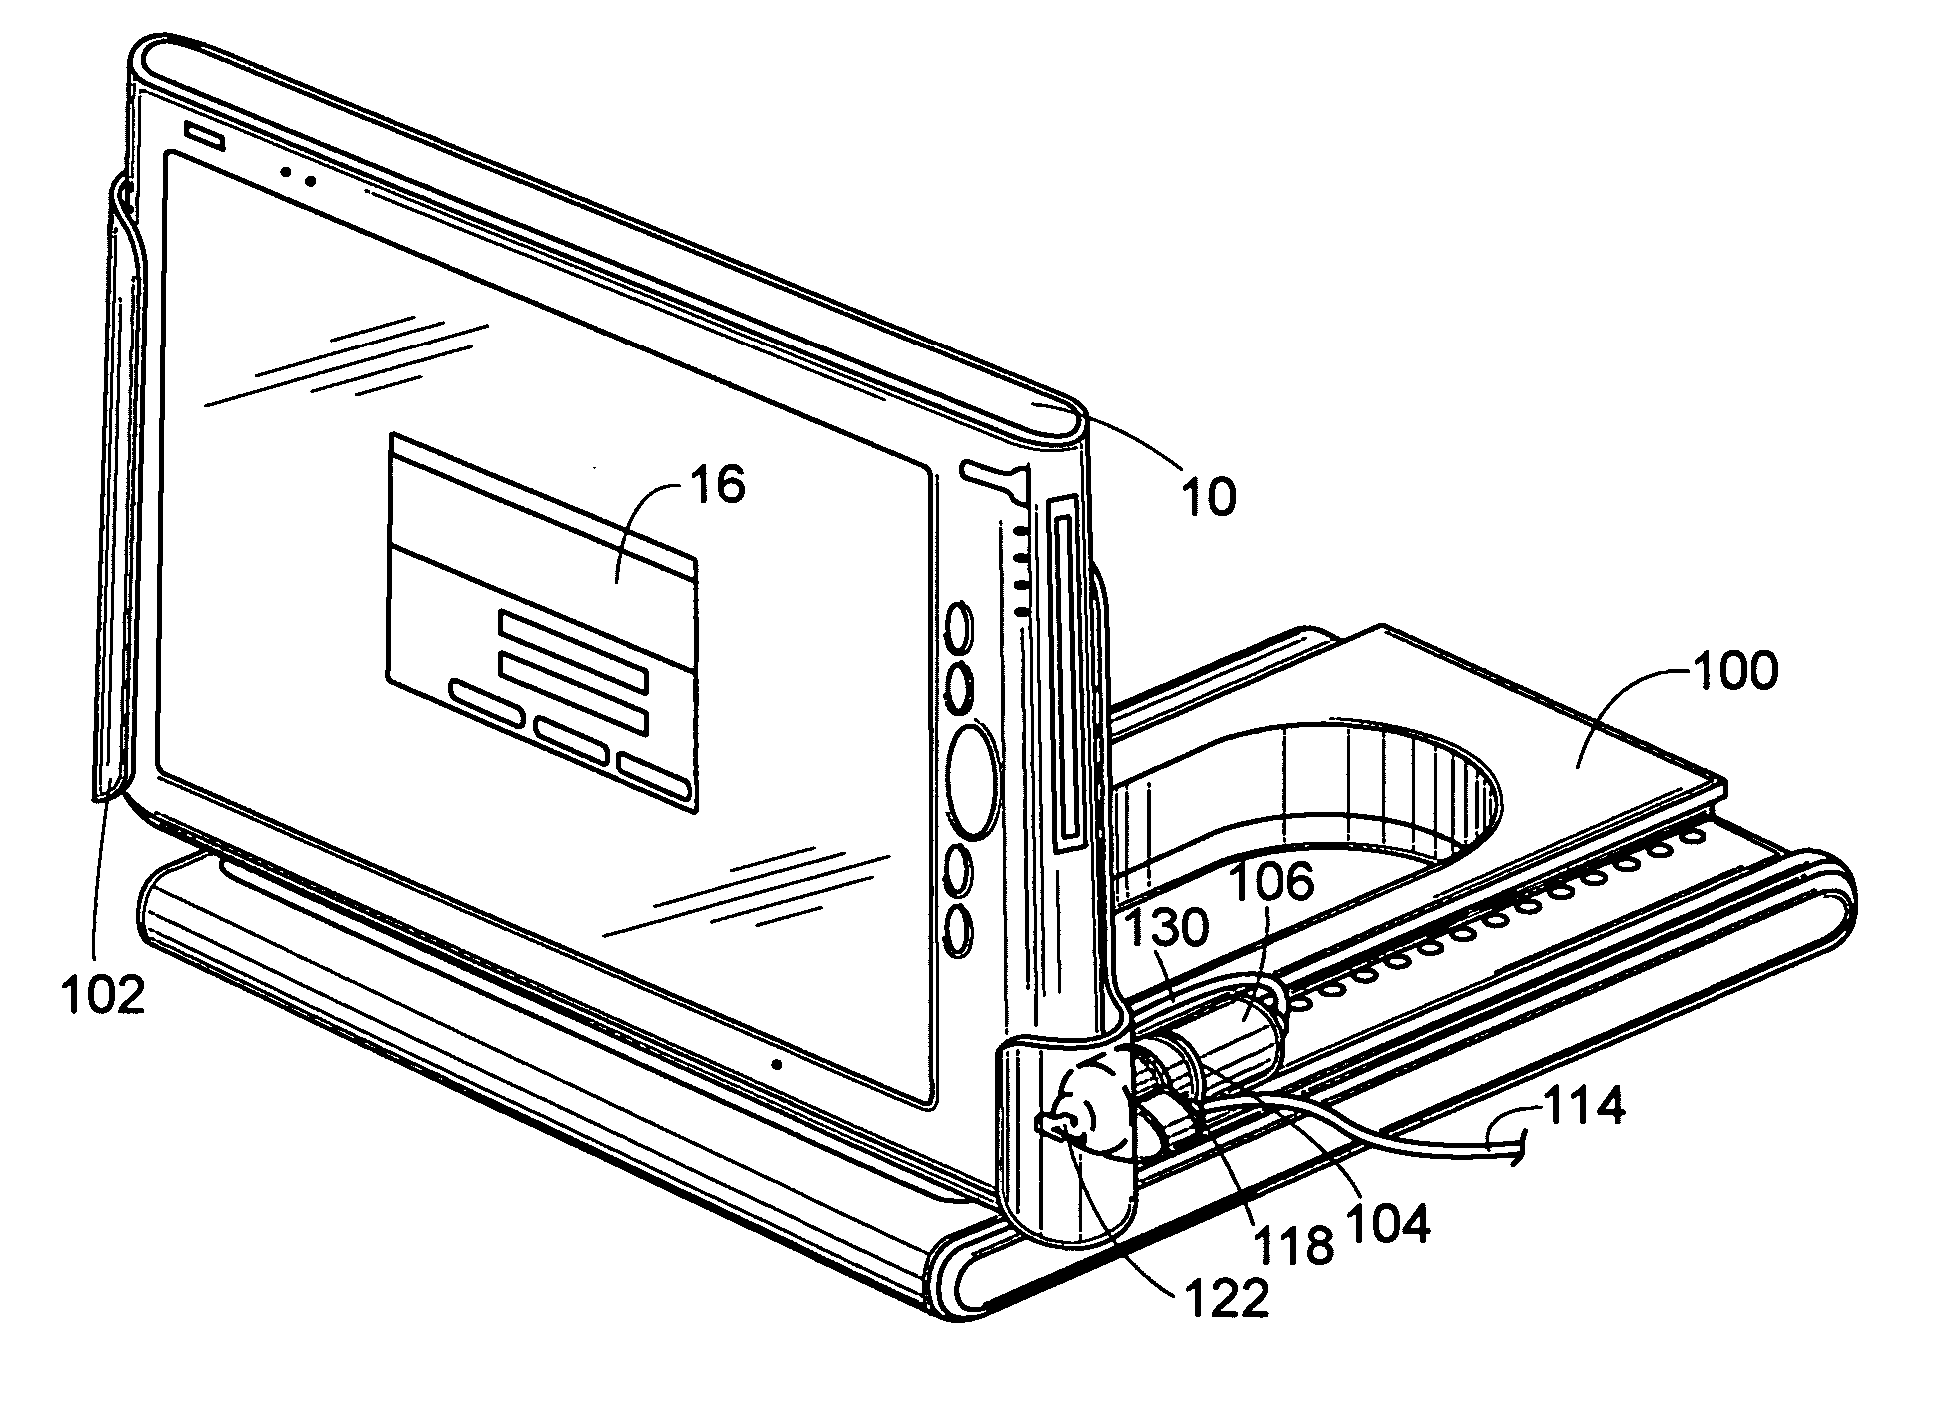 Method and system for controllably and selectively securing a portable computing device to a physical holding device